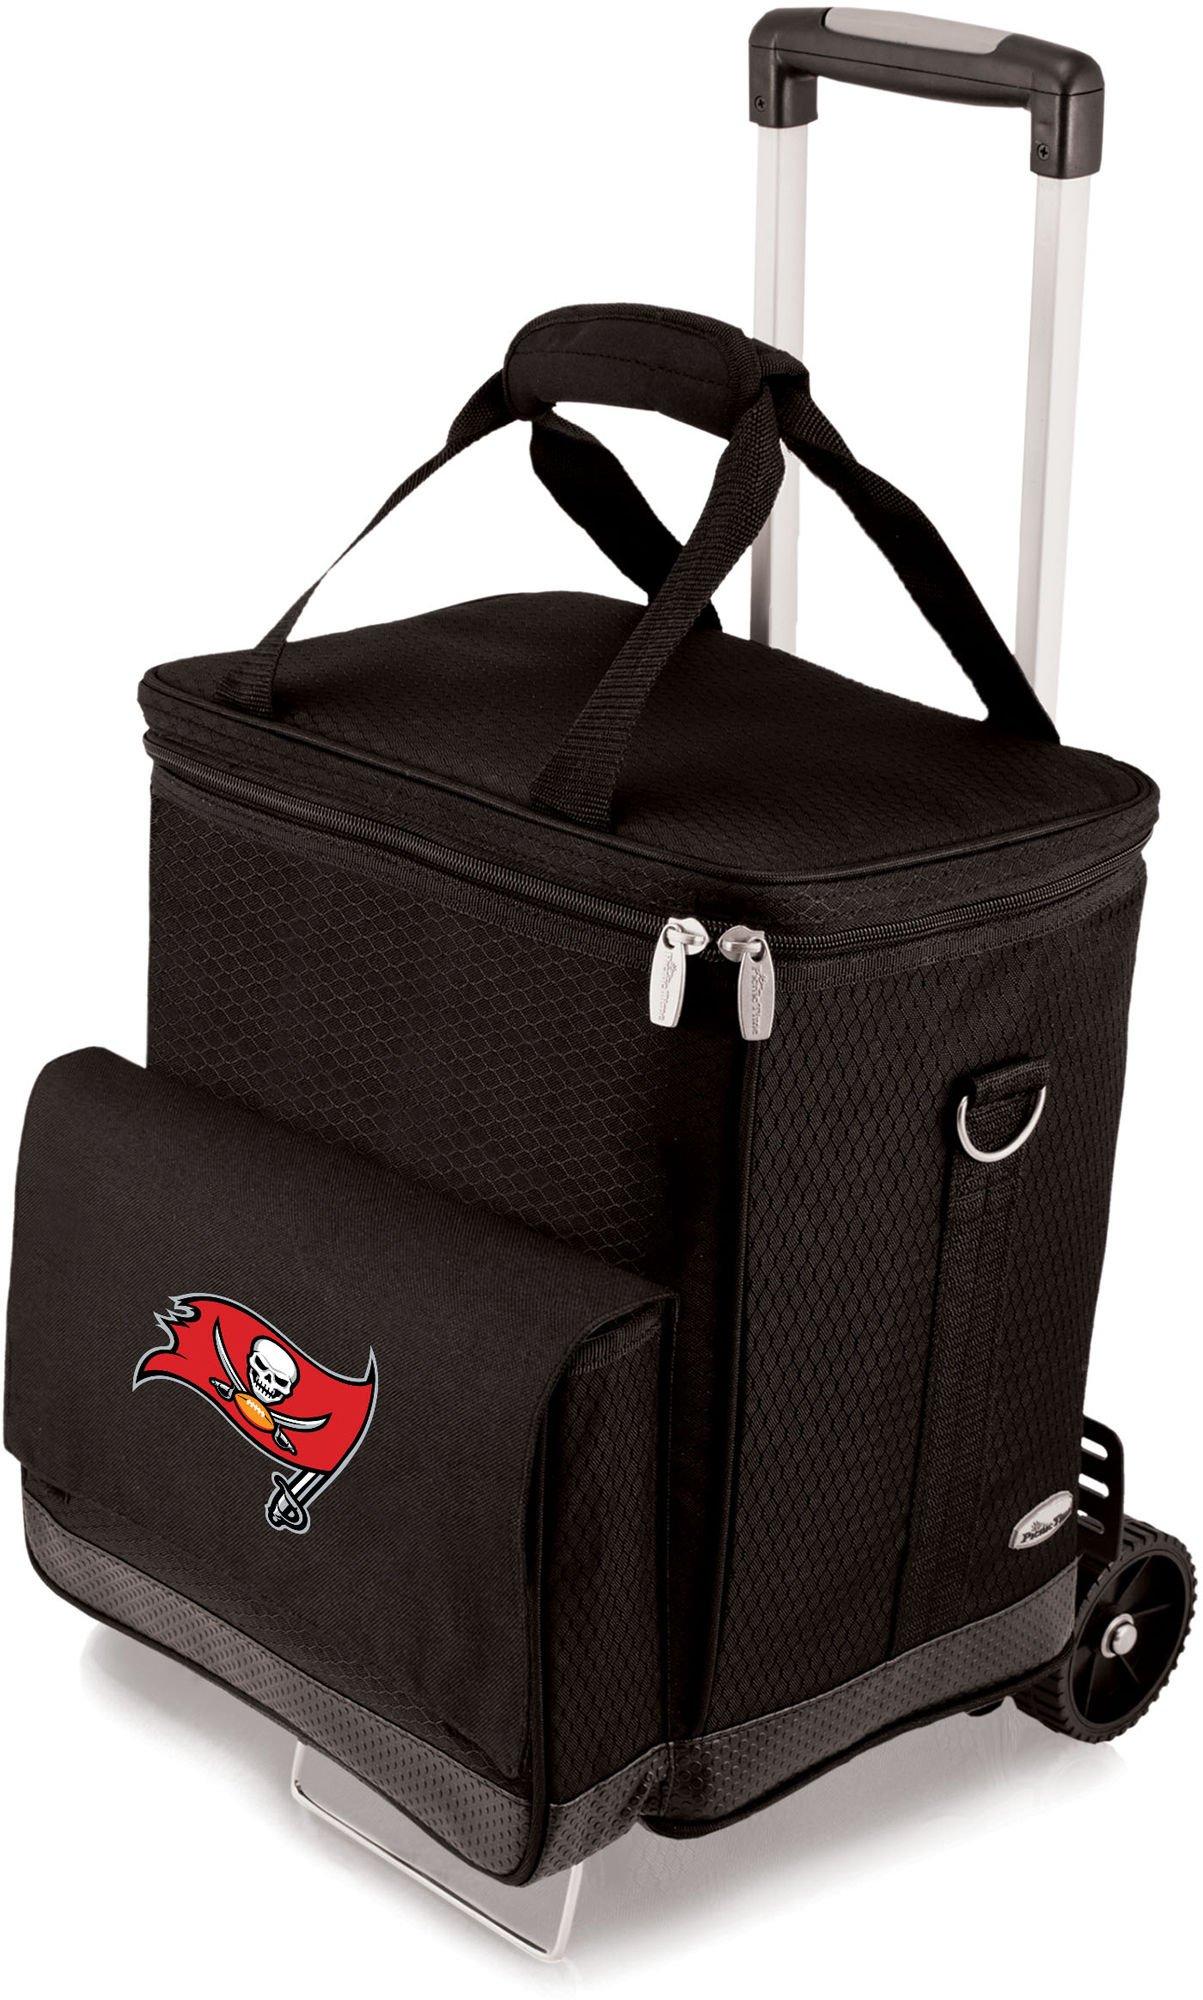 Tampa Bay Buccaneers 6 Bottle Wine Tote by Picnic Time